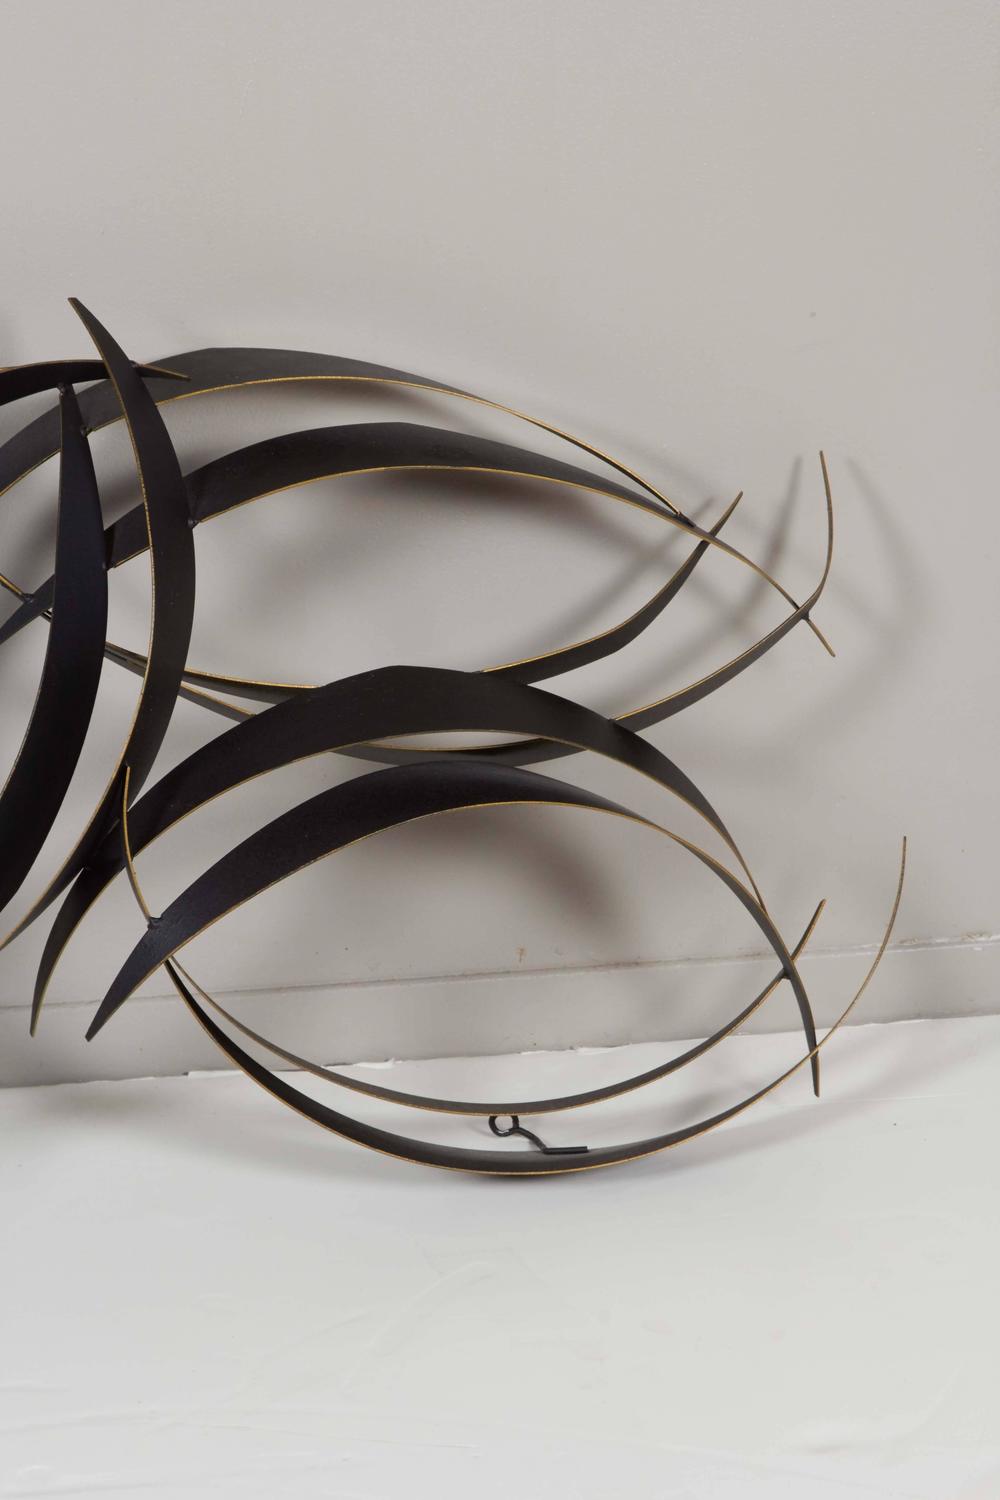 Curtis Jere Abstract Black Metal Wall Sculpture For Sale ...